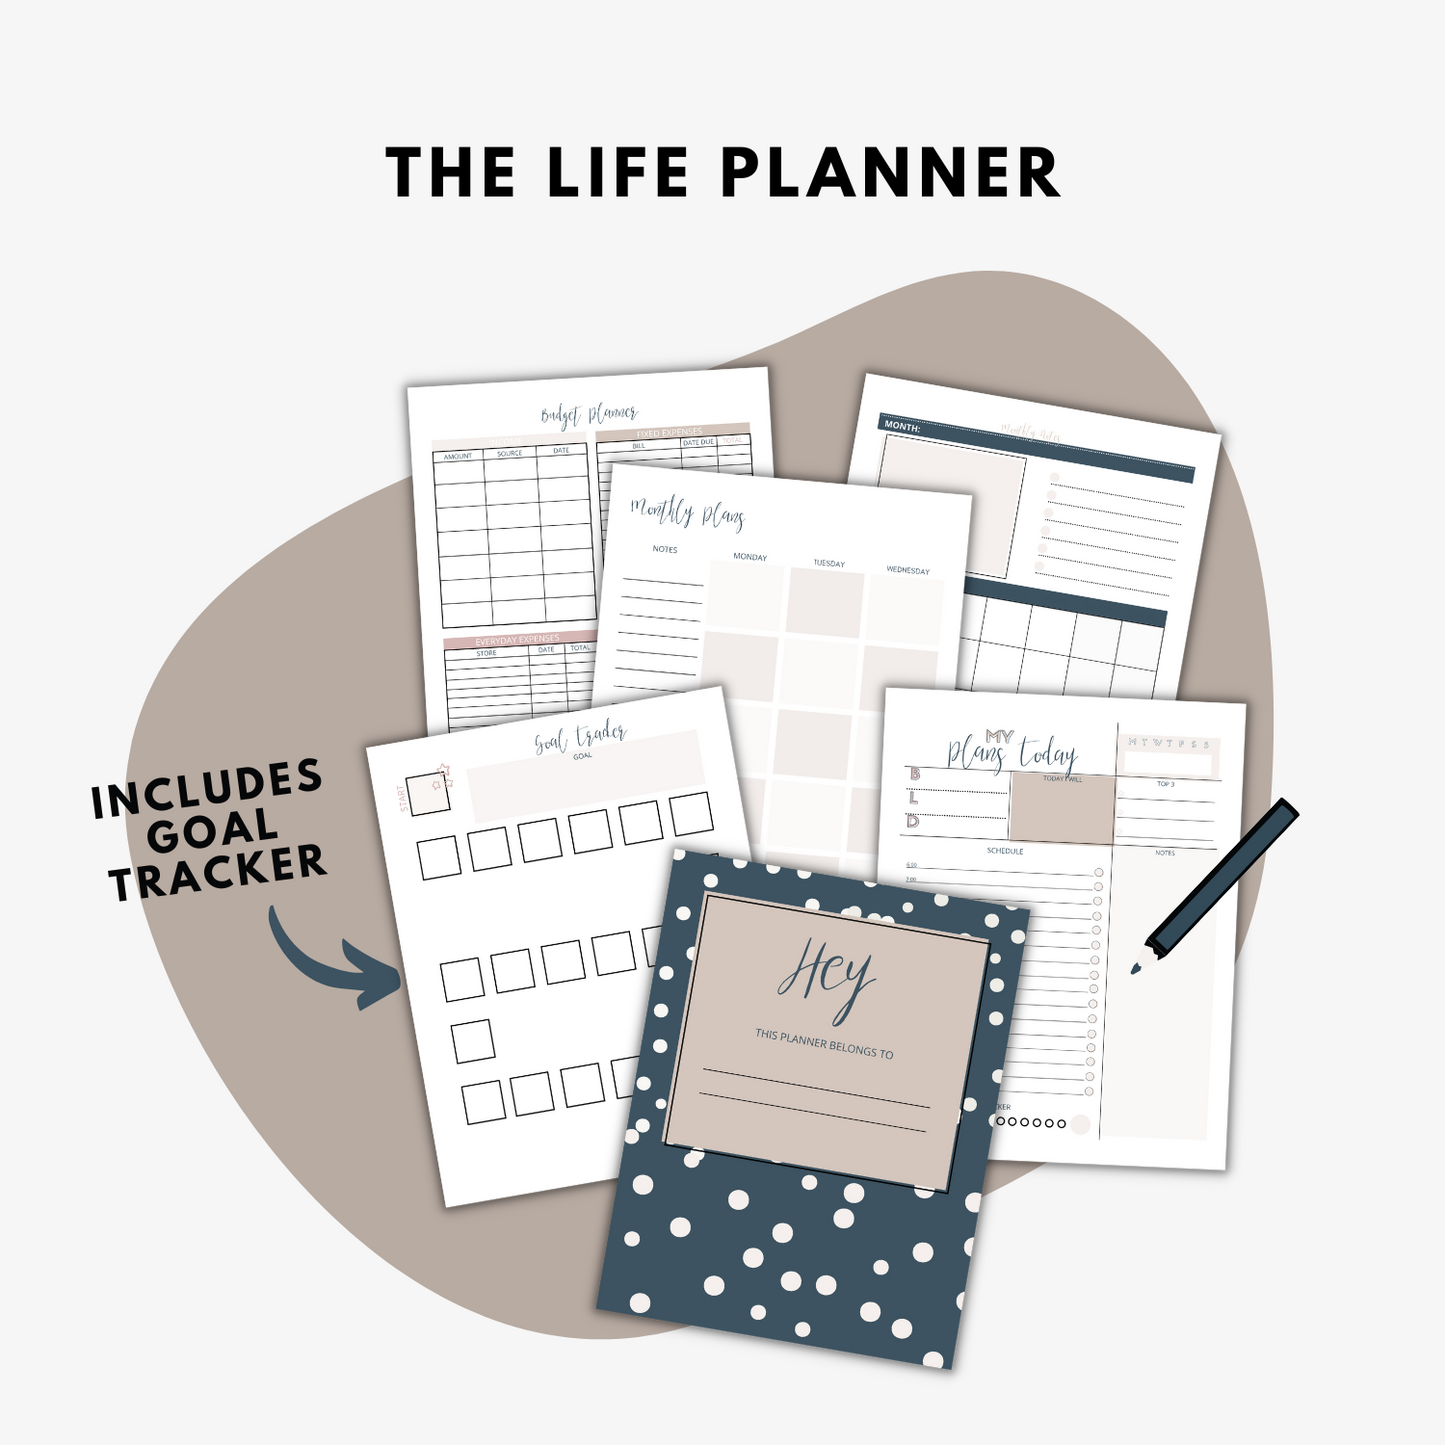 The Life Planner